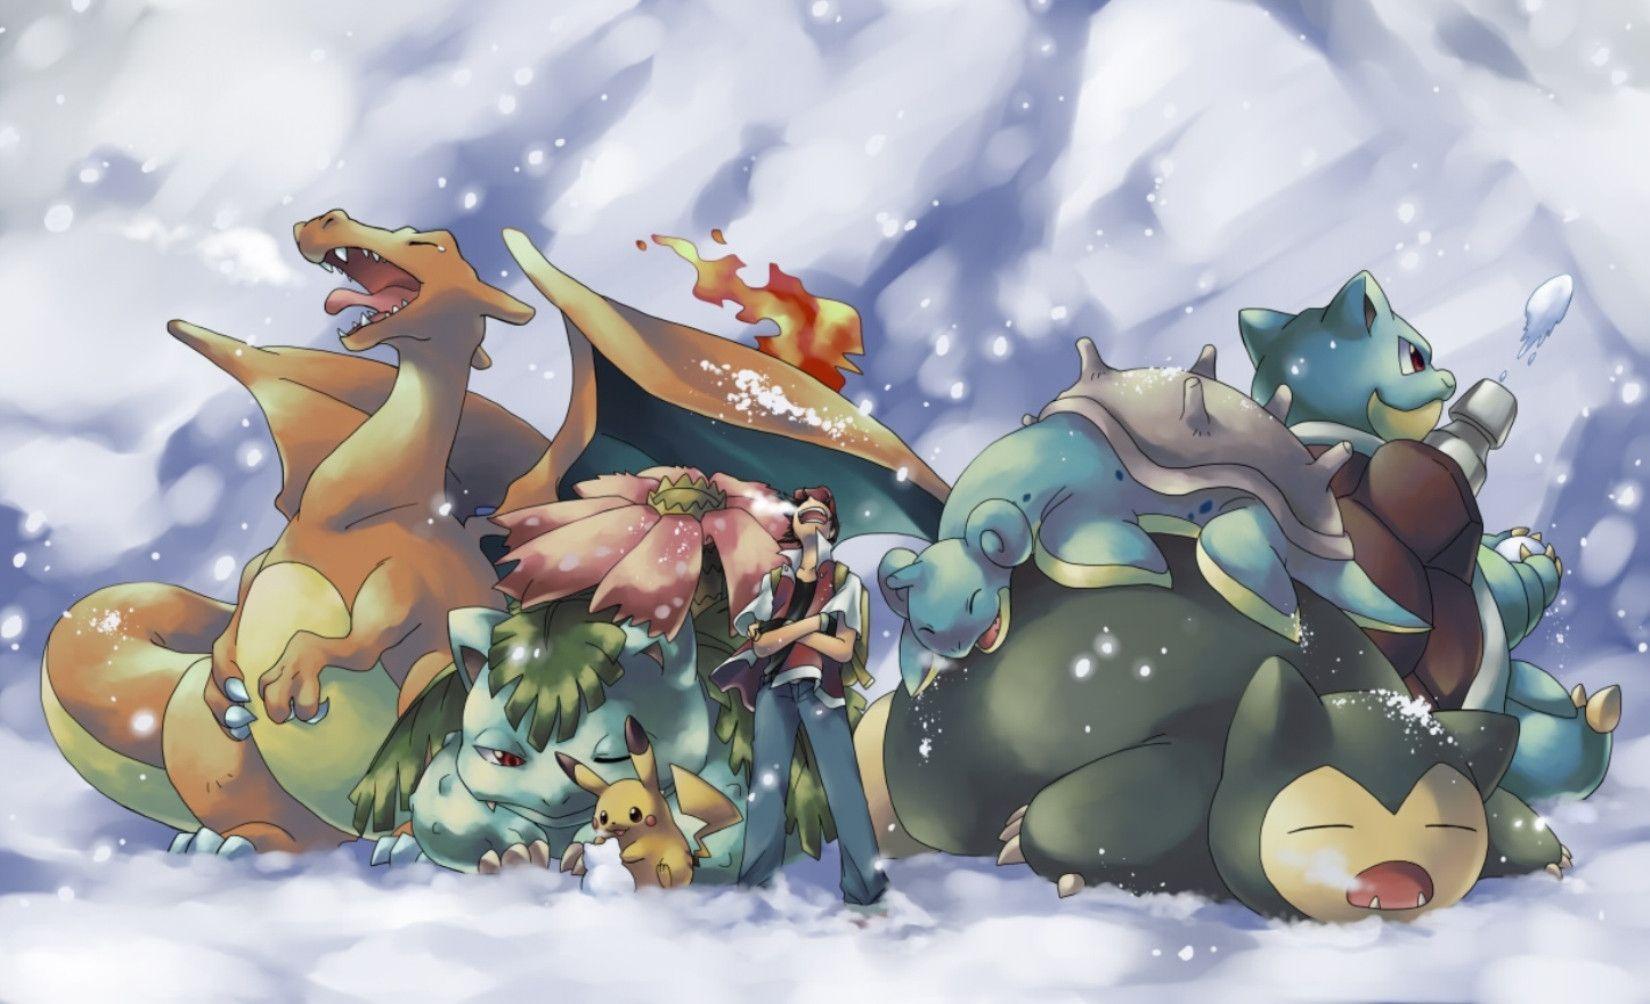 PURE AWESOME POKeMON WALLPAPERS 2